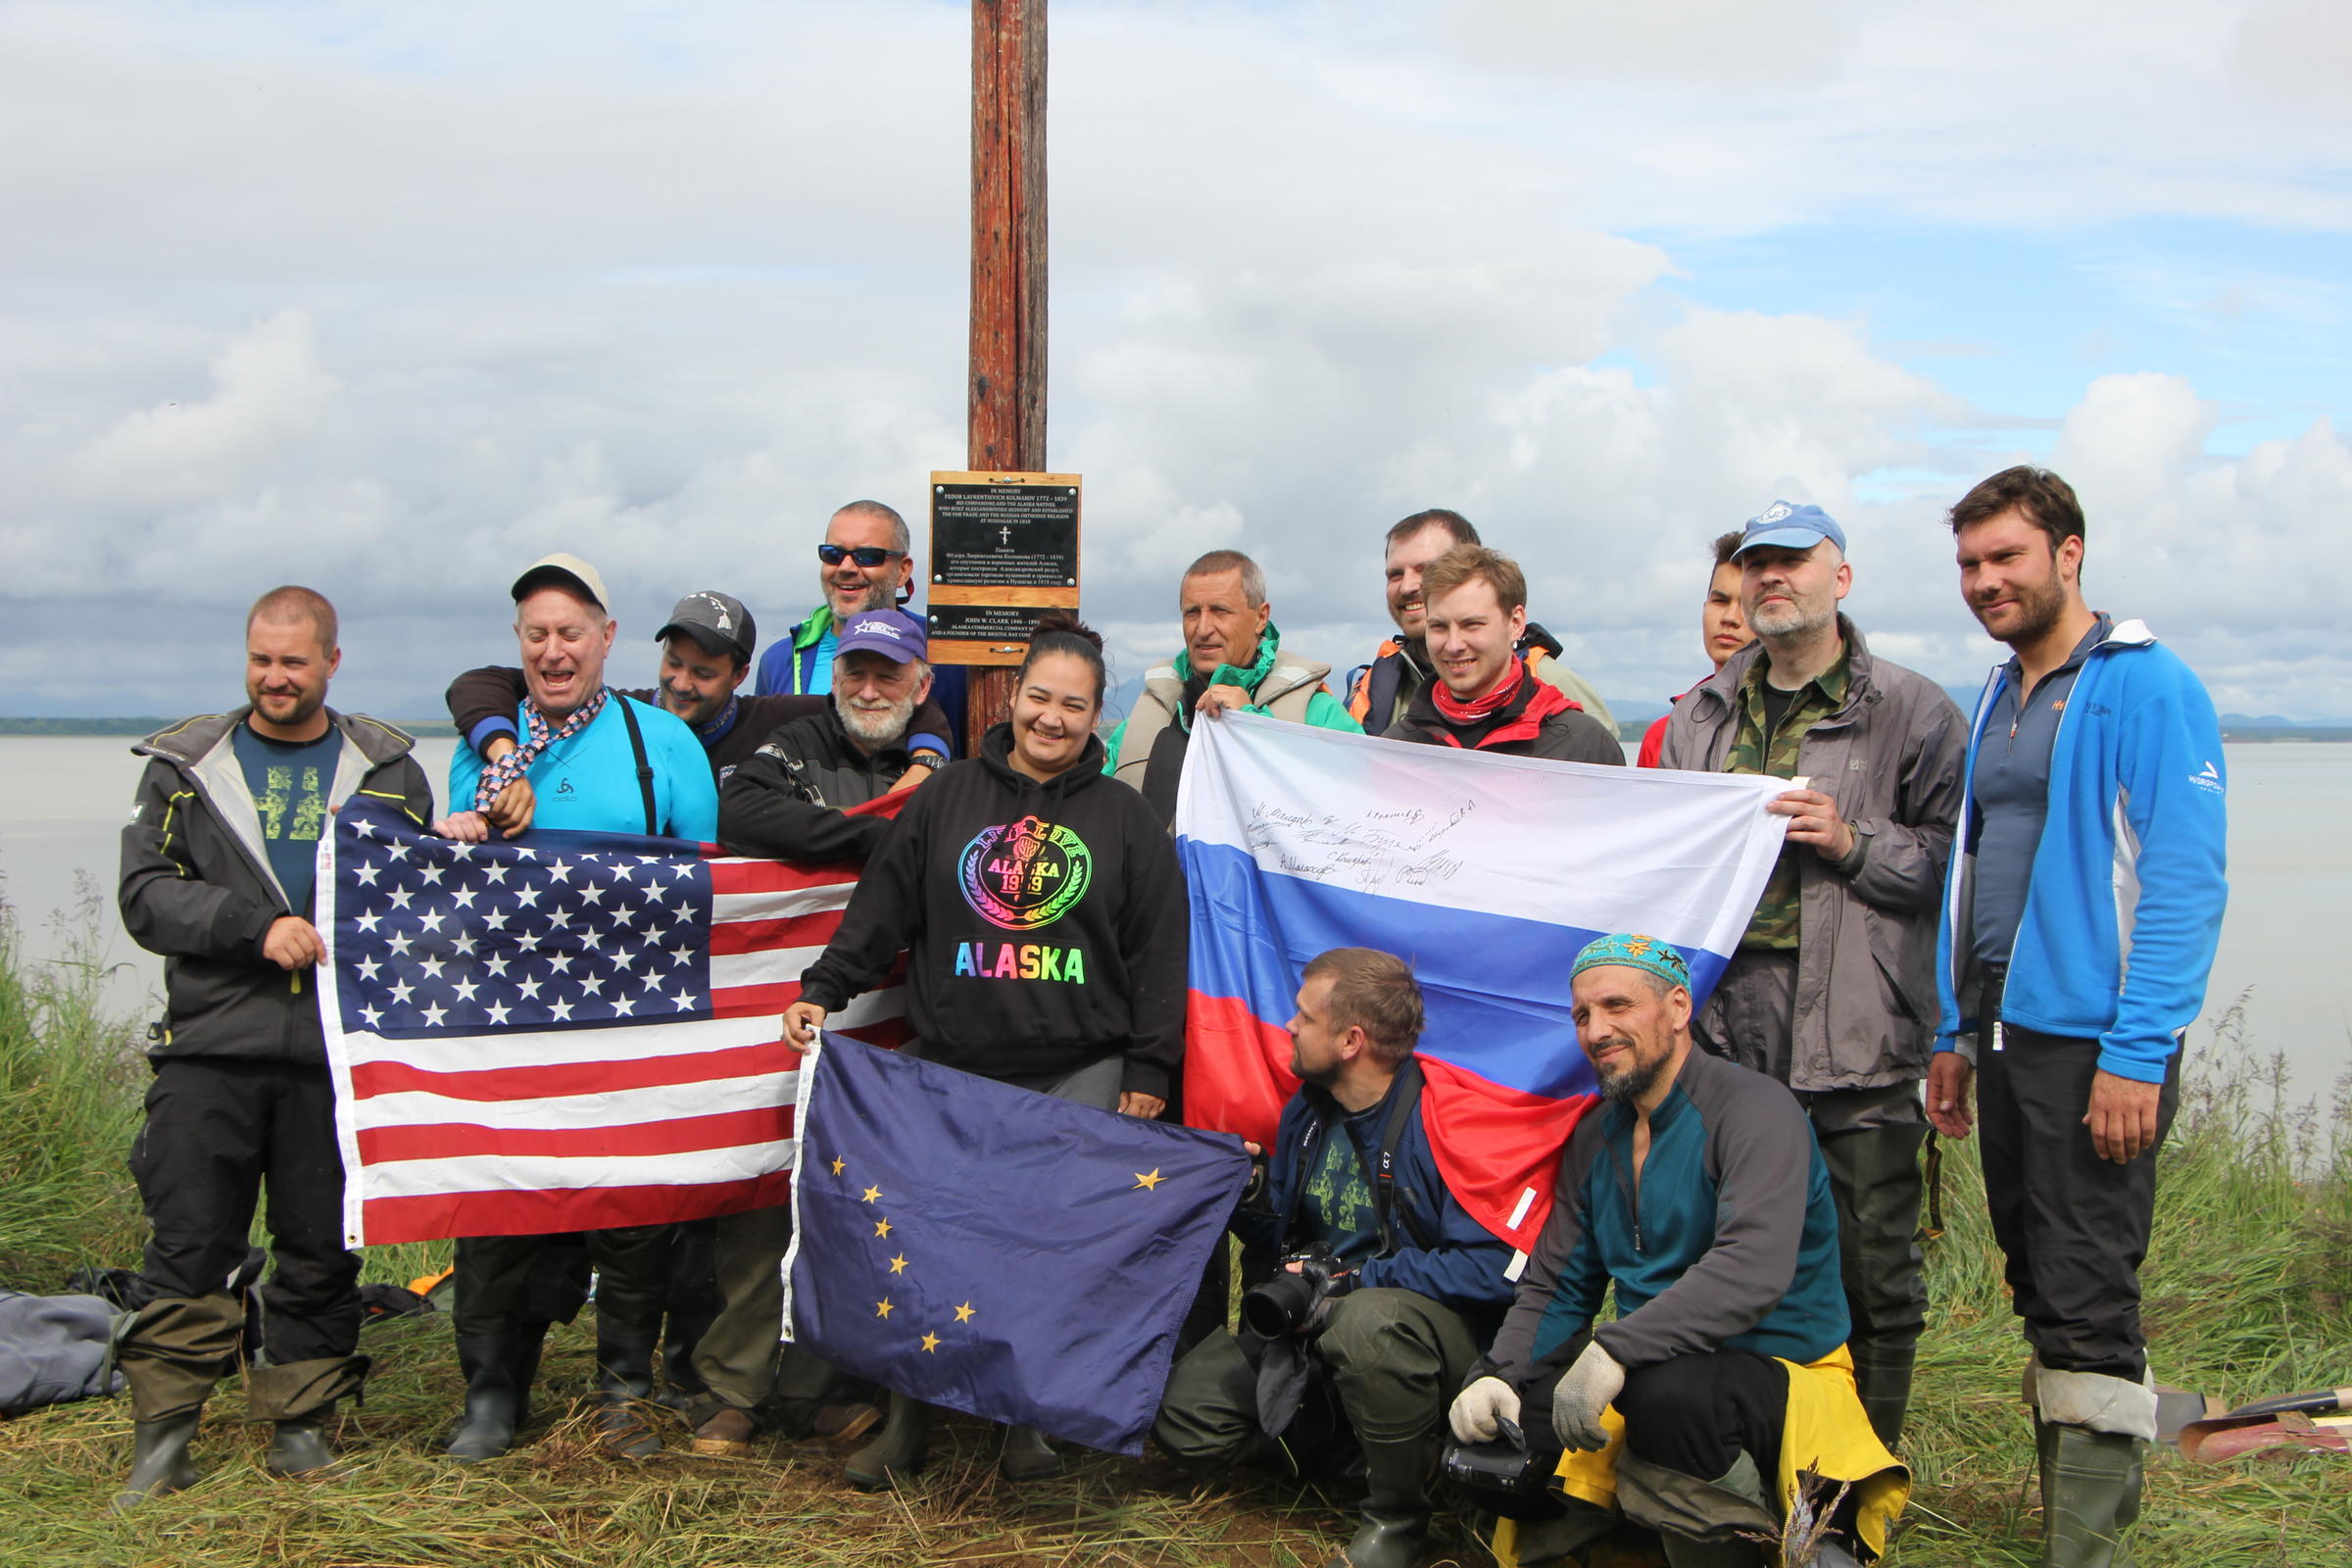 The Russian team and the Dillingham residents who helped to place the monument at Nushagak pose with the American, Russian, and Alaskan flags. (Photo by Allison Mollenkam/KDLG)